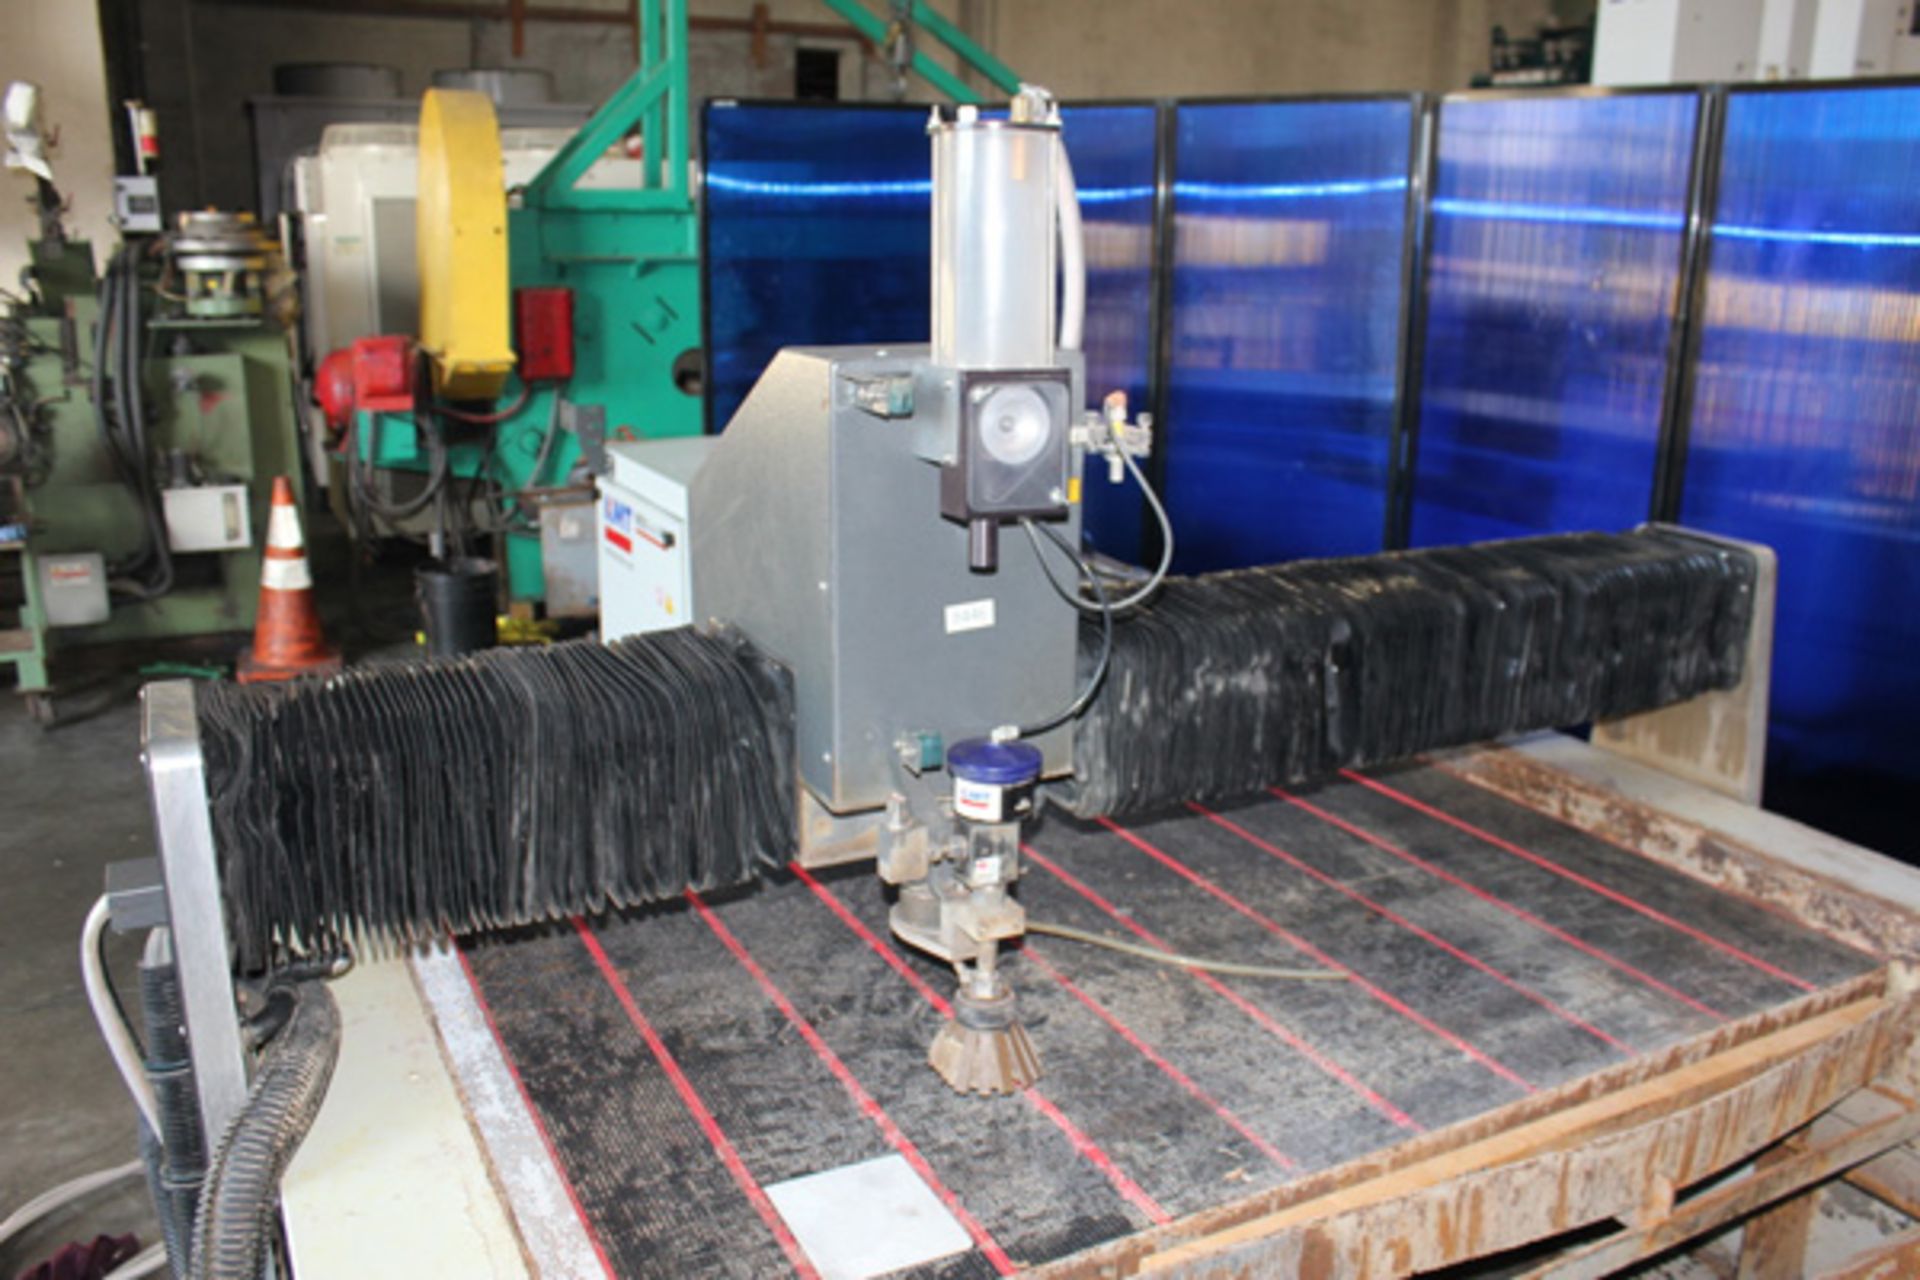 2013 Multicam CNC Water Jet | 120" x 60" x 3.5", Mdl: V-204, S/N: V-204-W09724 - 8446HP - Image 6 of 23